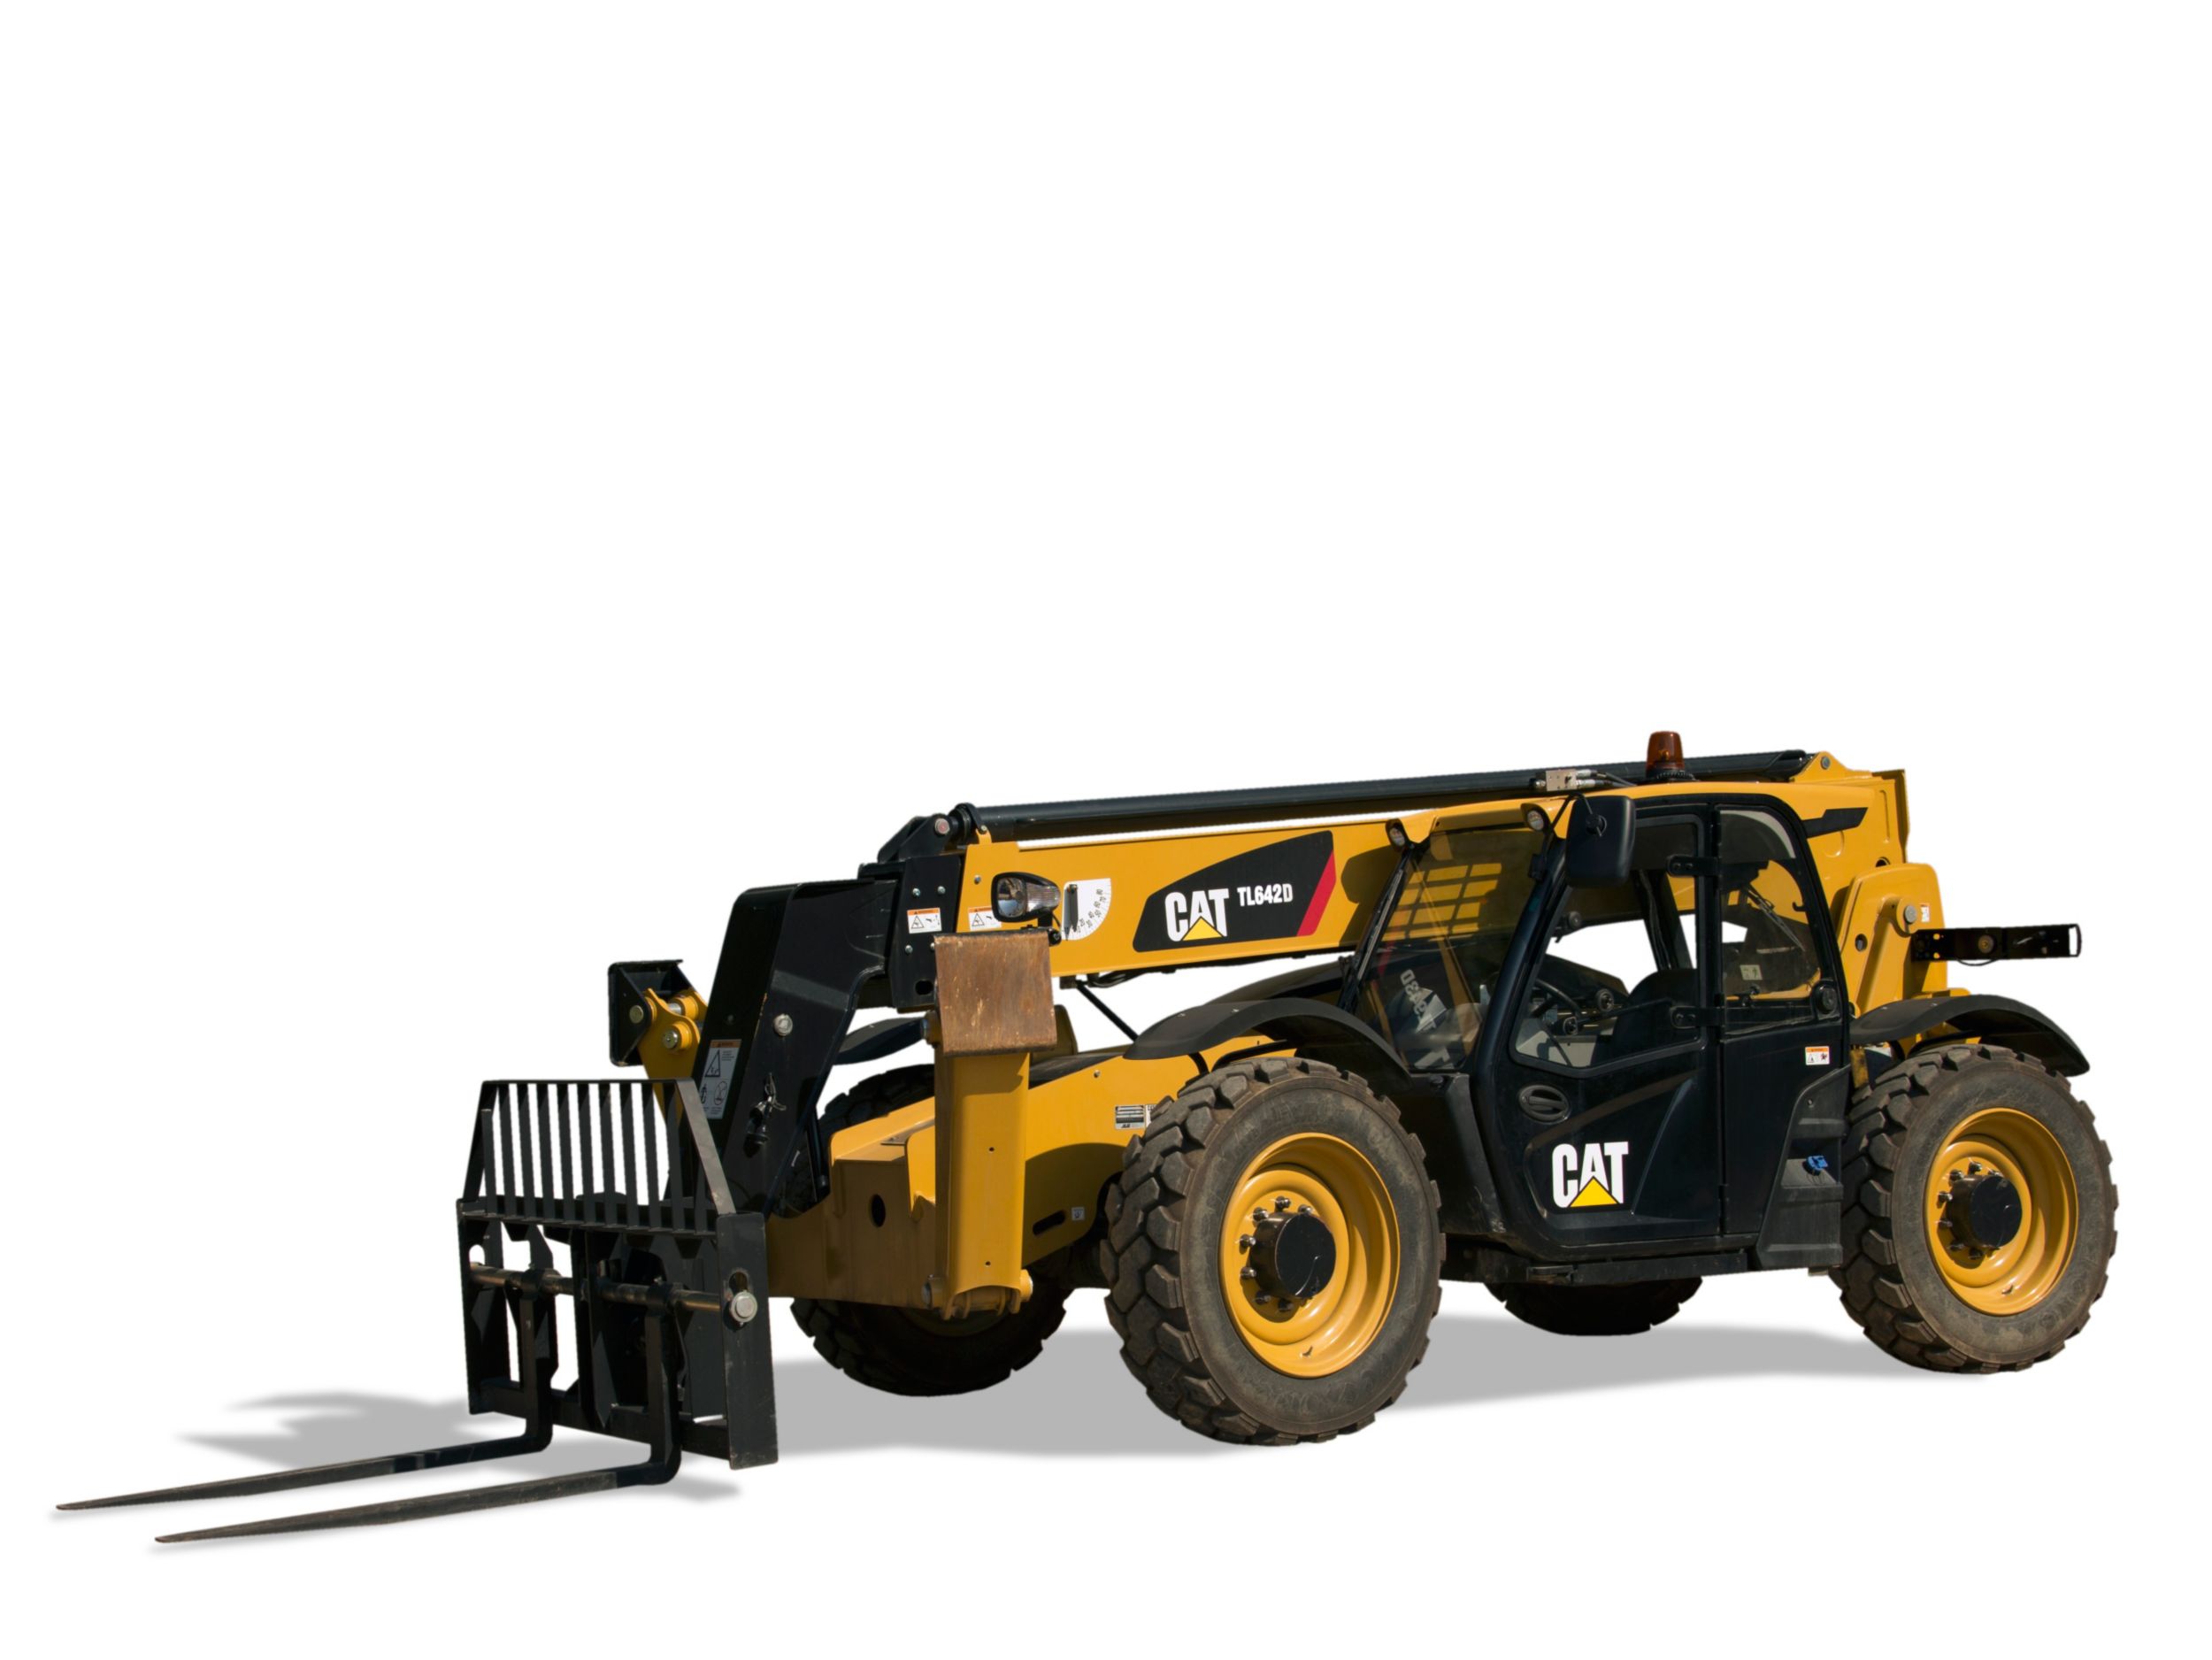 TL642D Telehandler with Stabilizers